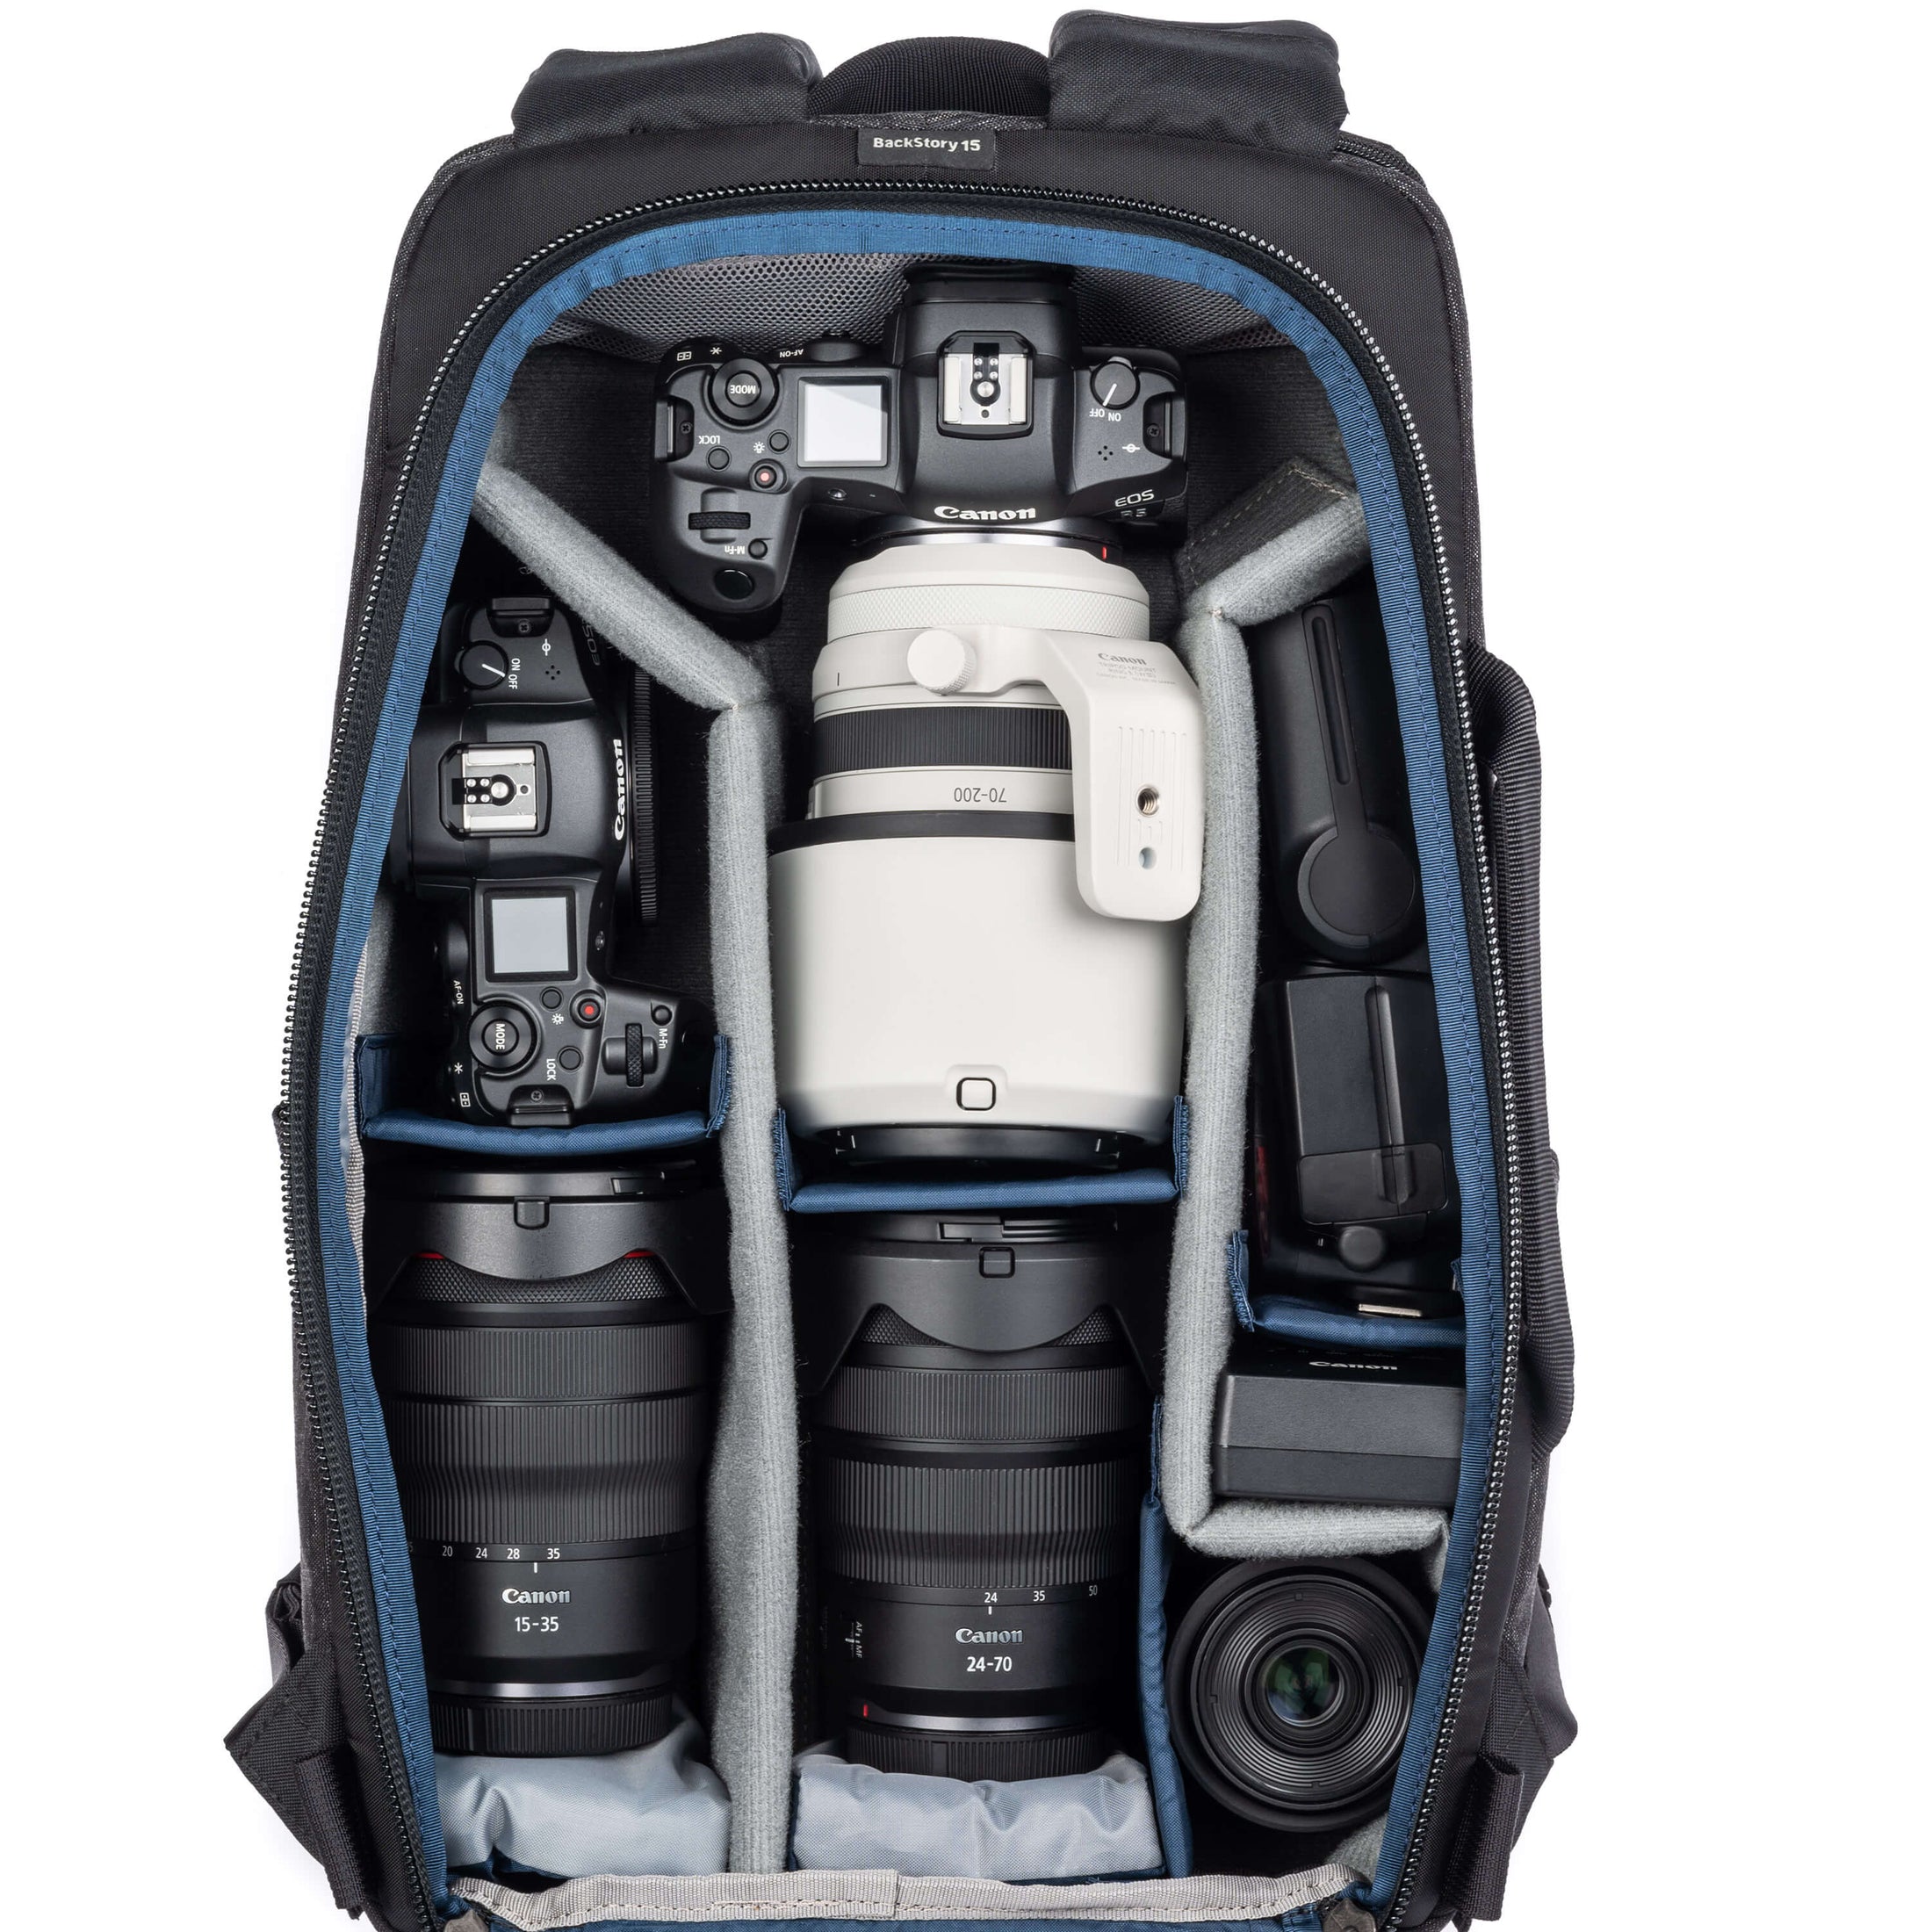 BackStory 15 Camera Backpack - Top panel and rear panel access to gear ...